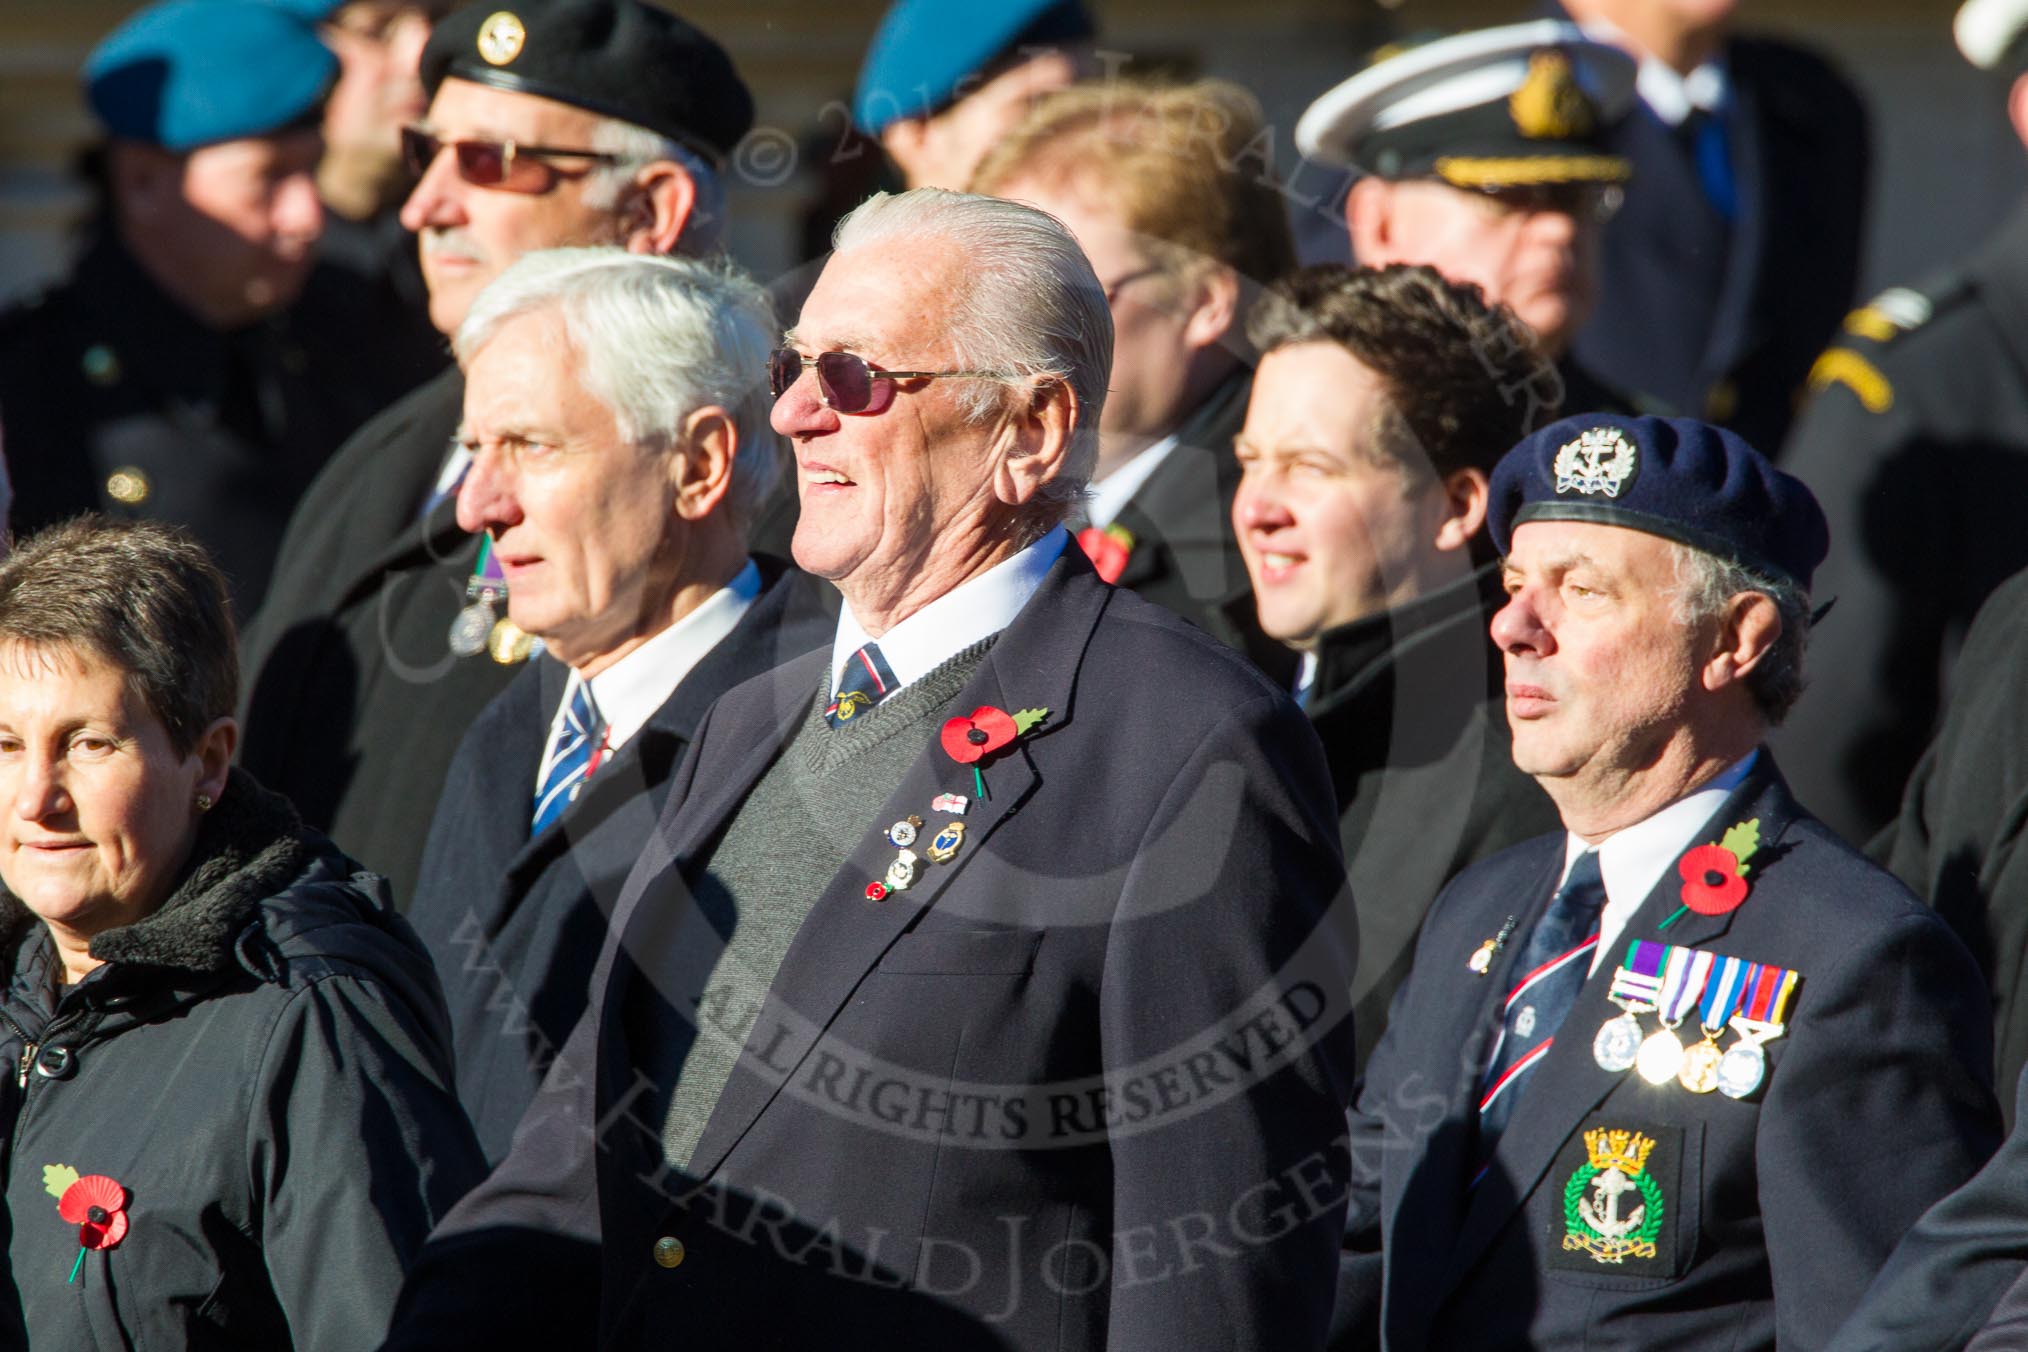 Remembrance Sunday Cenotaph March Past 2013: E2 - Royal Naval Association..
Press stand opposite the Foreign Office building, Whitehall, London SW1,
London,
Greater London,
United Kingdom,
on 10 November 2013 at 11:44, image #363